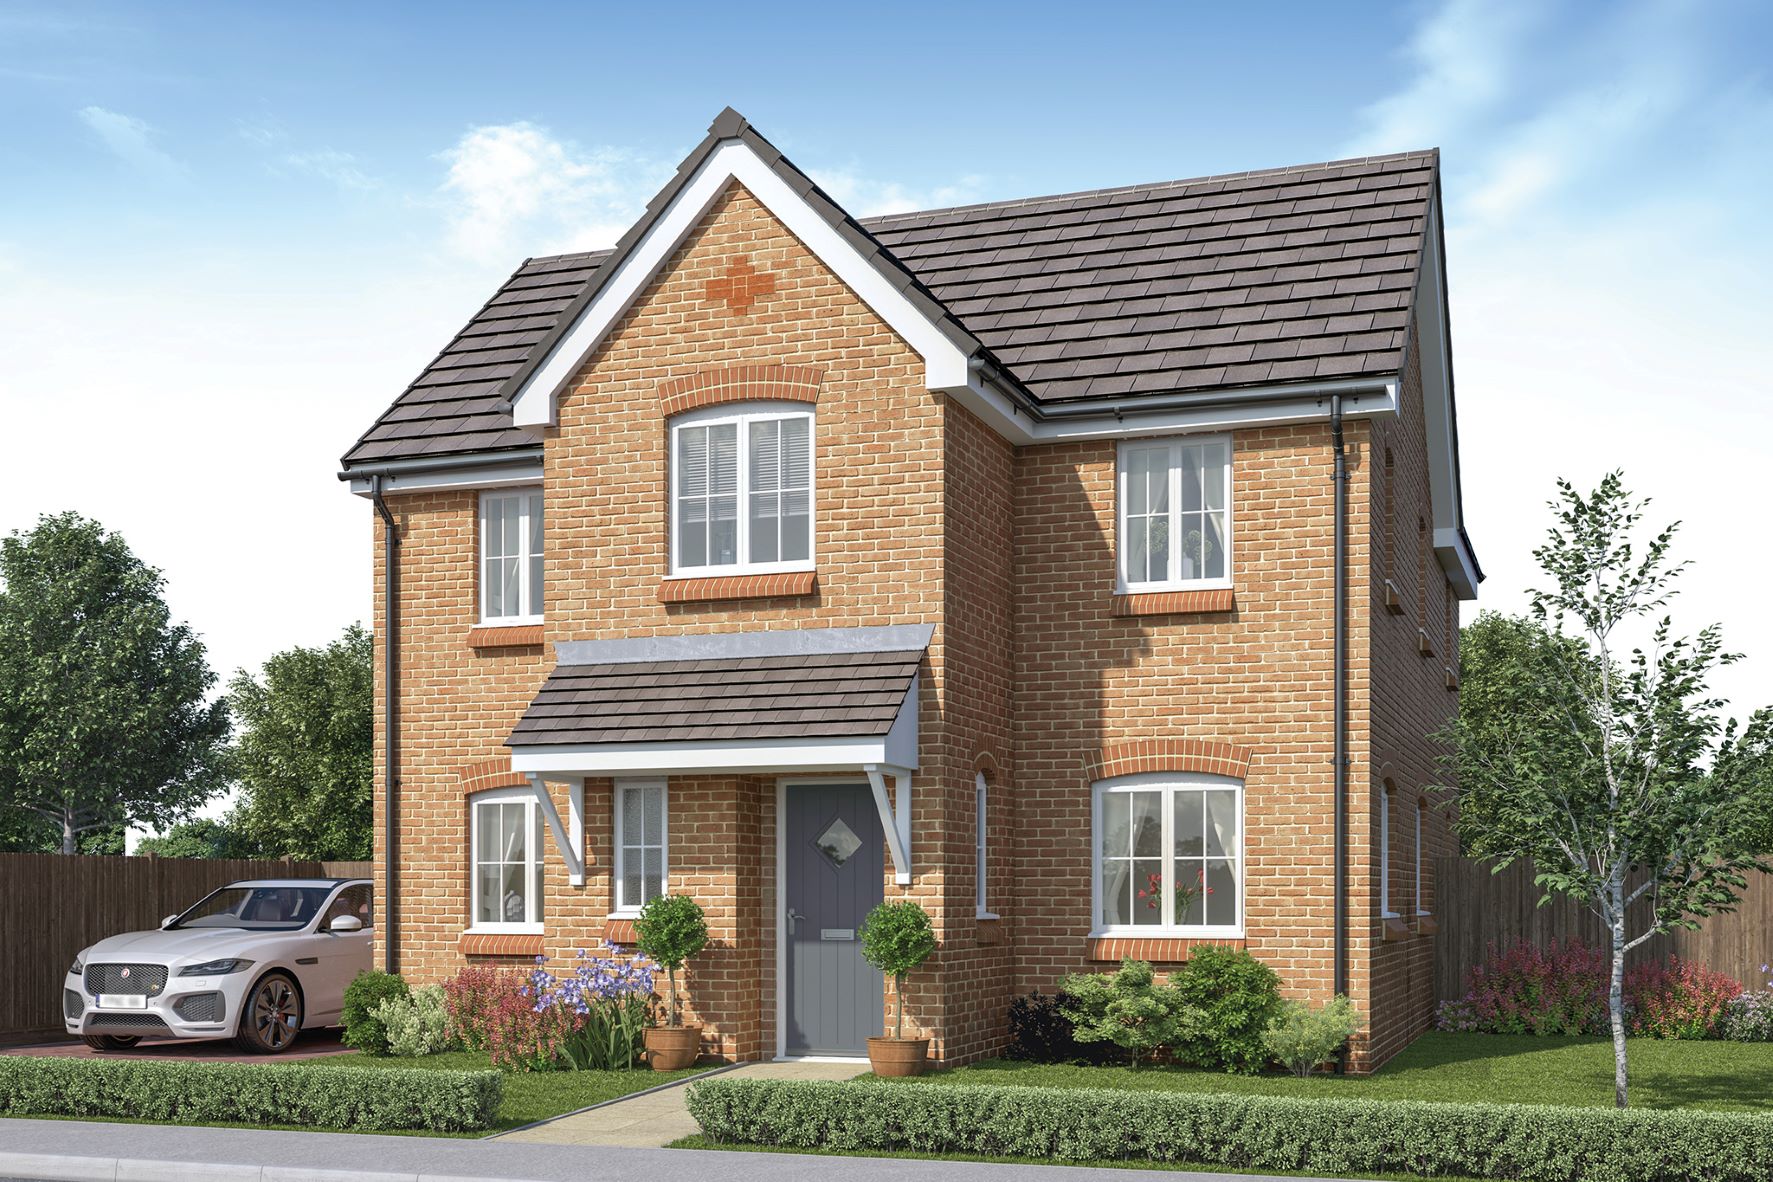 First Homes at Hugglescote Development Go on Sale